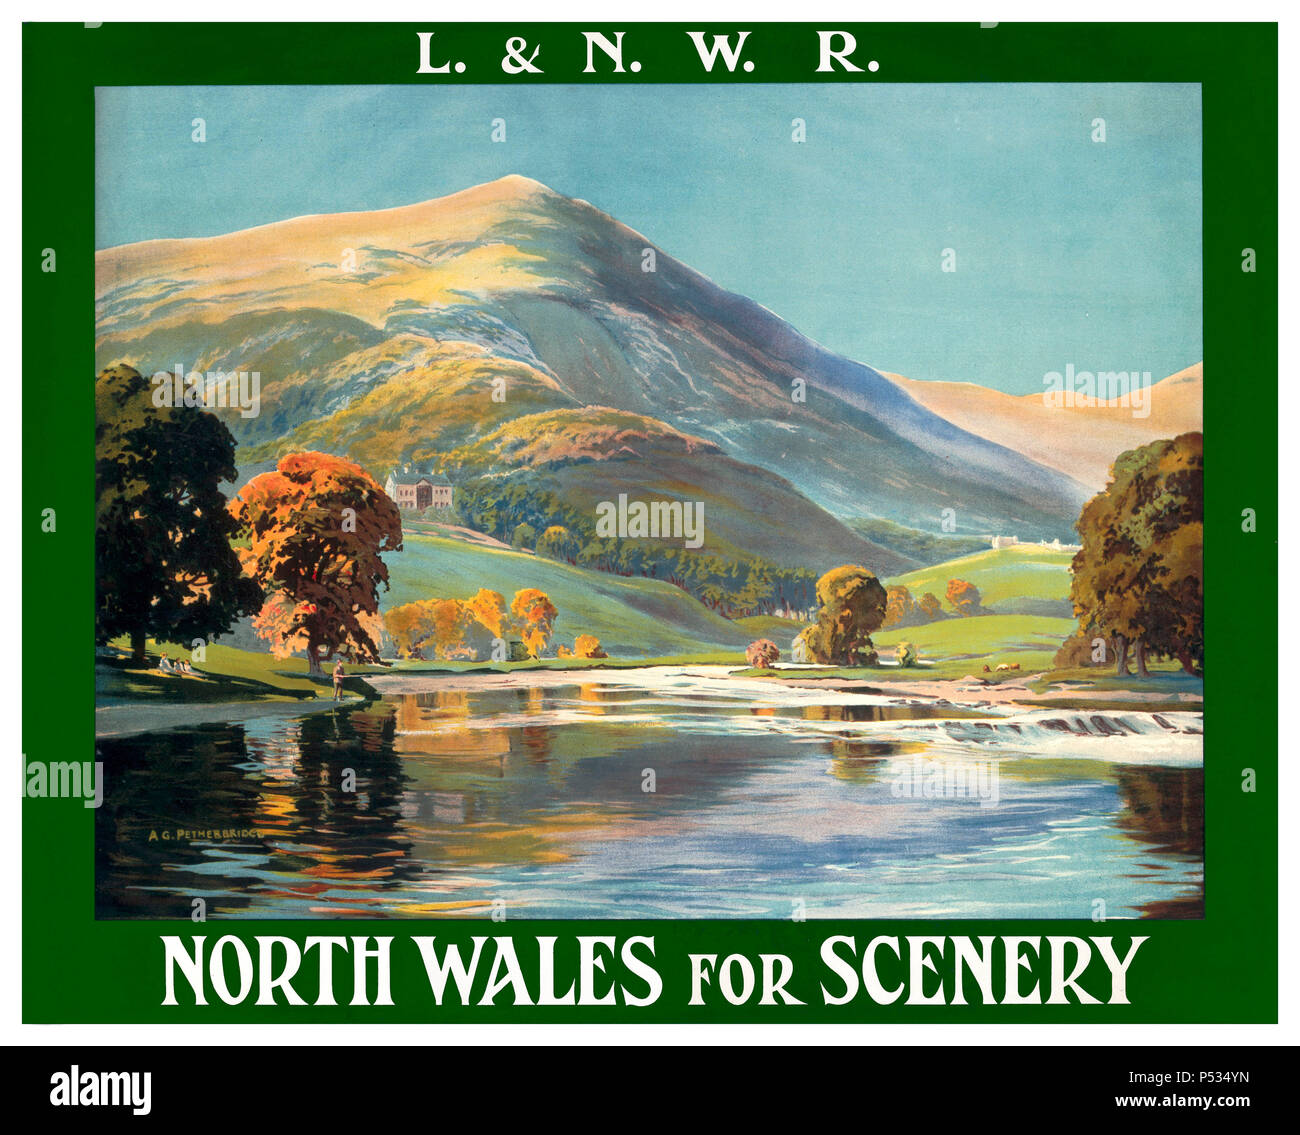 Vintage 1930’s Rail Poster North Wales L.&N.W.R. London & North Western Railway with rural countryside scene of river rapids and mountains. “NORTH WALES for SCENERY” Stock Photo